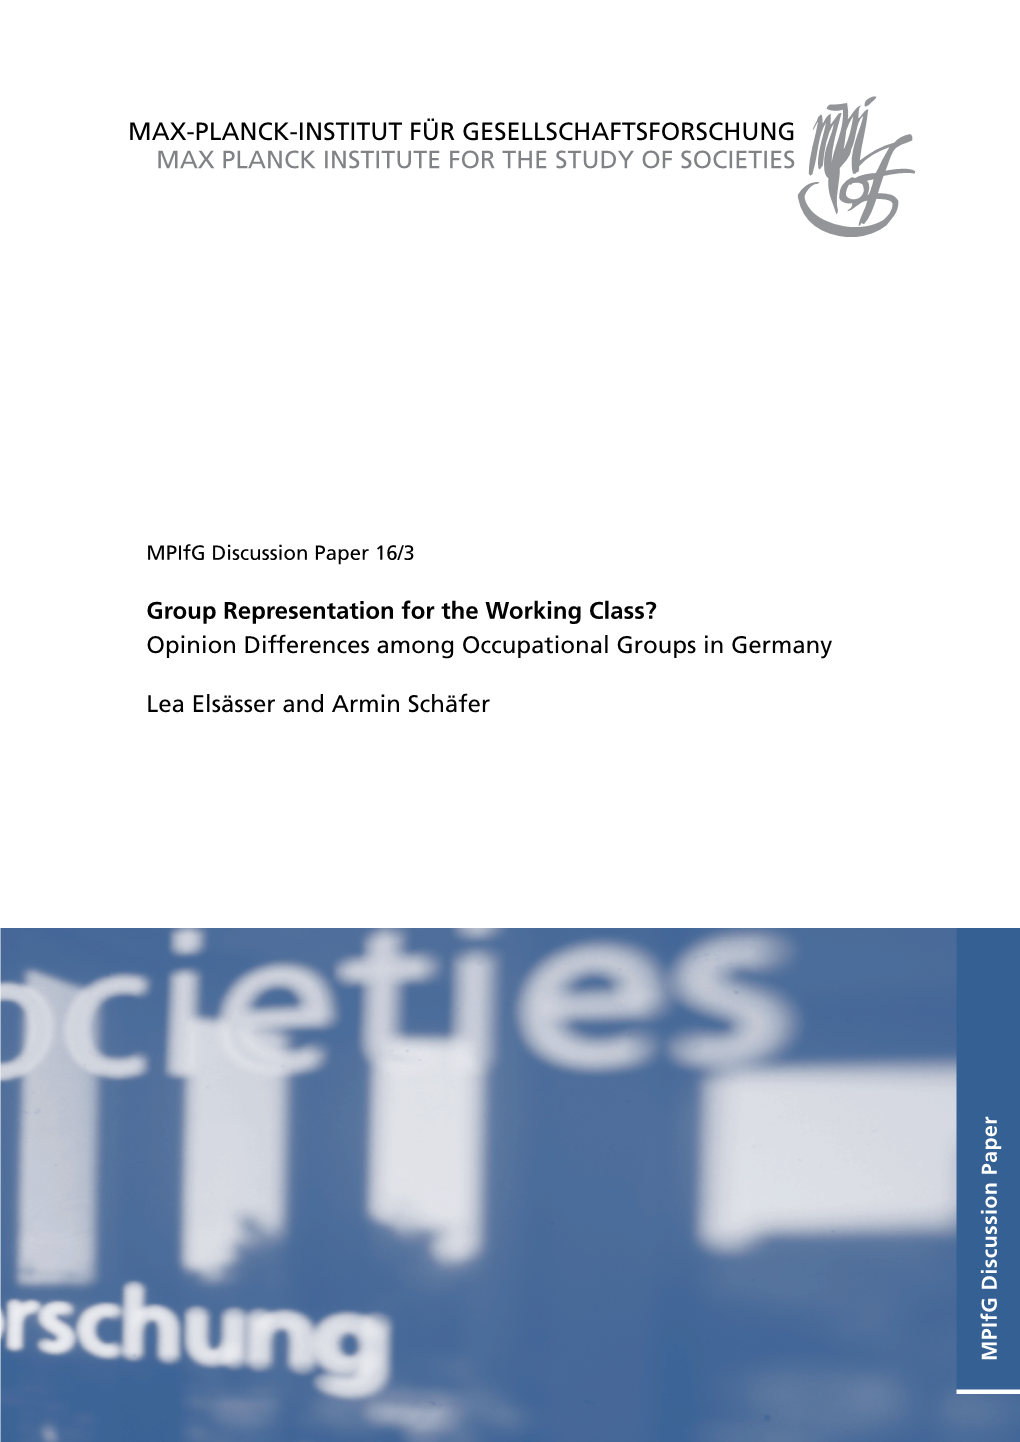 Group Representation for the Working Class? Opinion Differences Among Occupational Groups in Germany